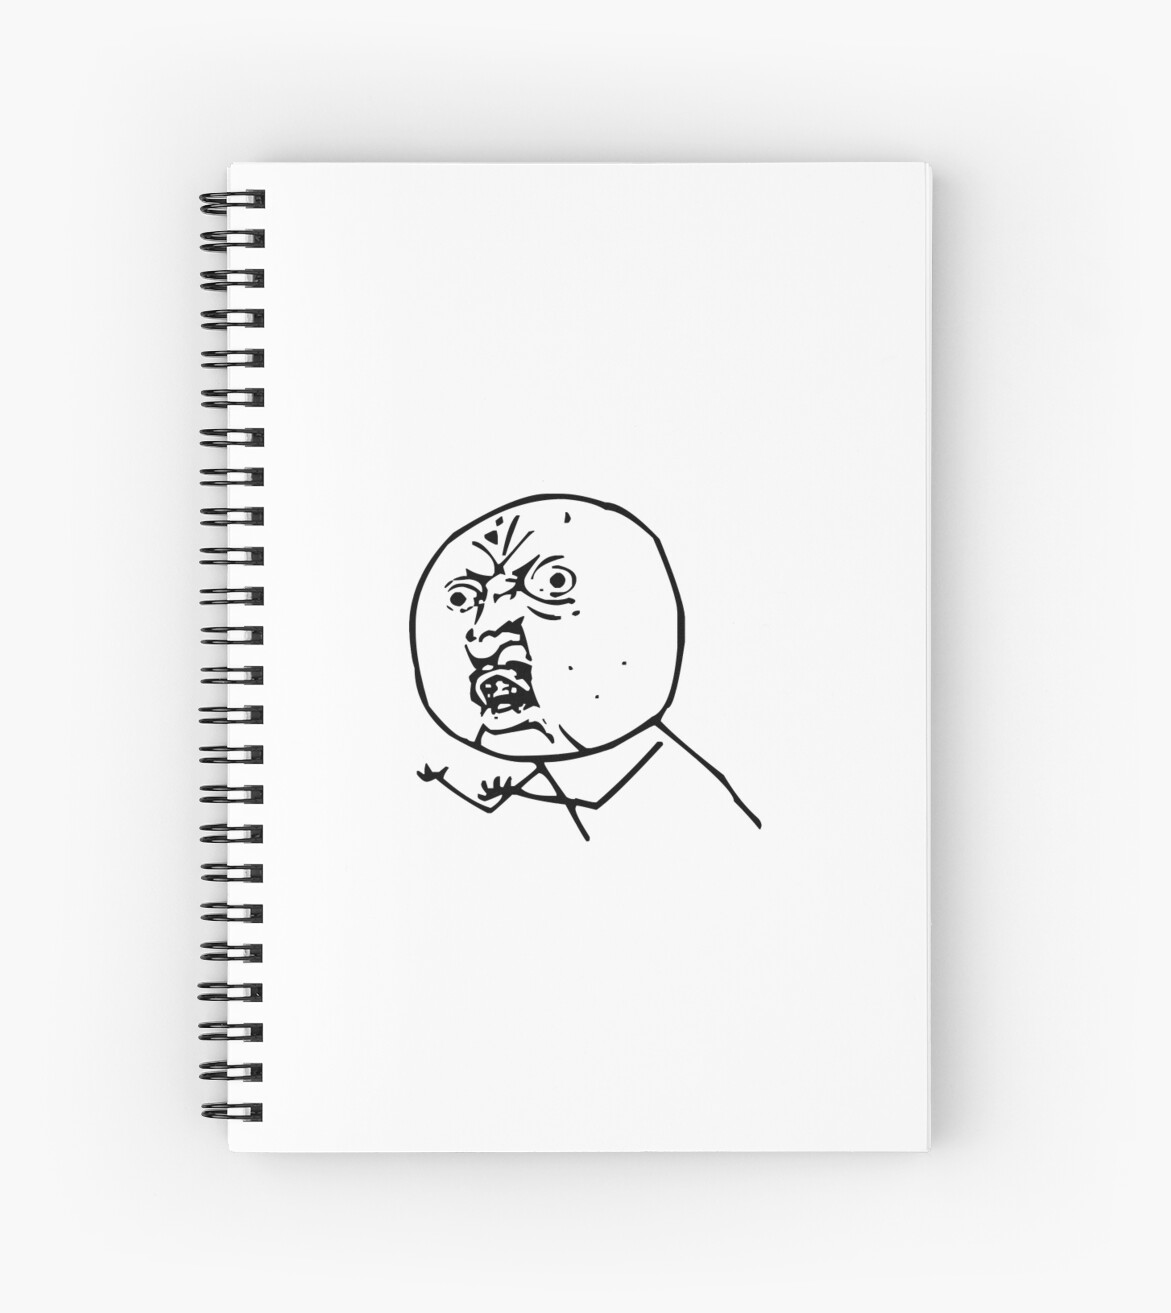 Why You No Meme Face Spiral Notebooks By Caddystar Redbubble